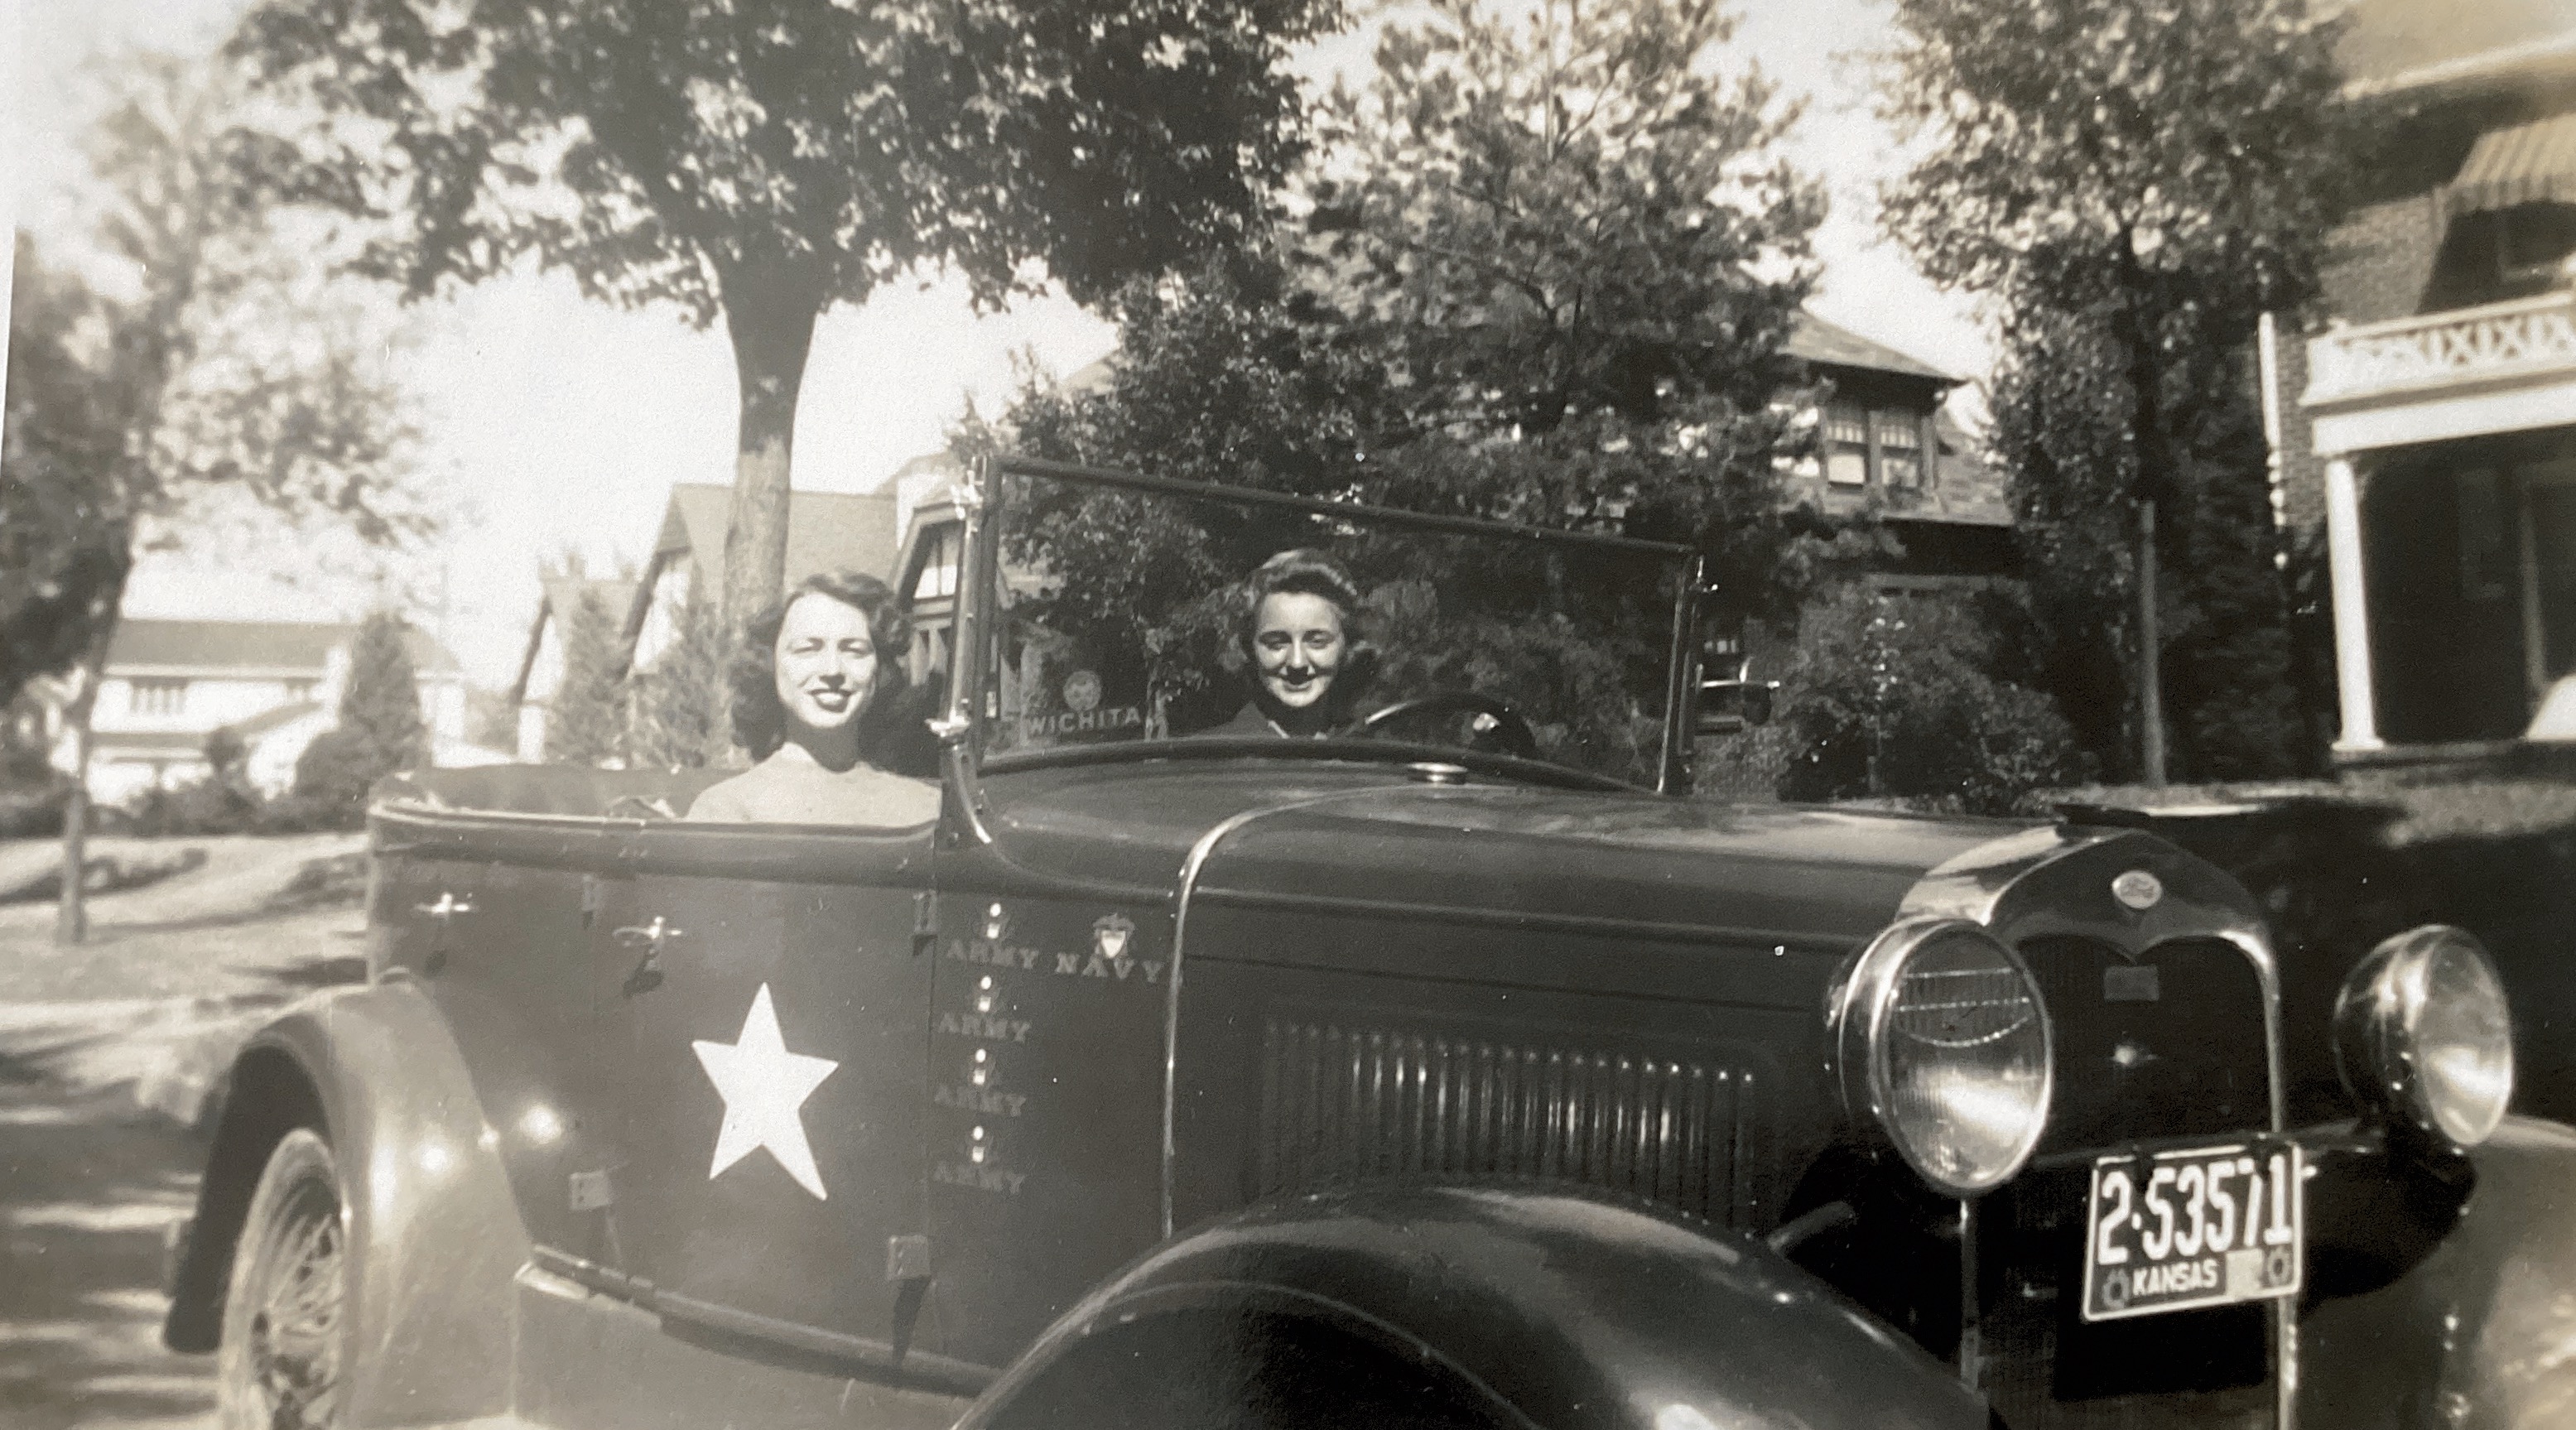 Helen Corman’s Car — “The Blue Bomber” with 2 of her friends.  Circa 1940’s.